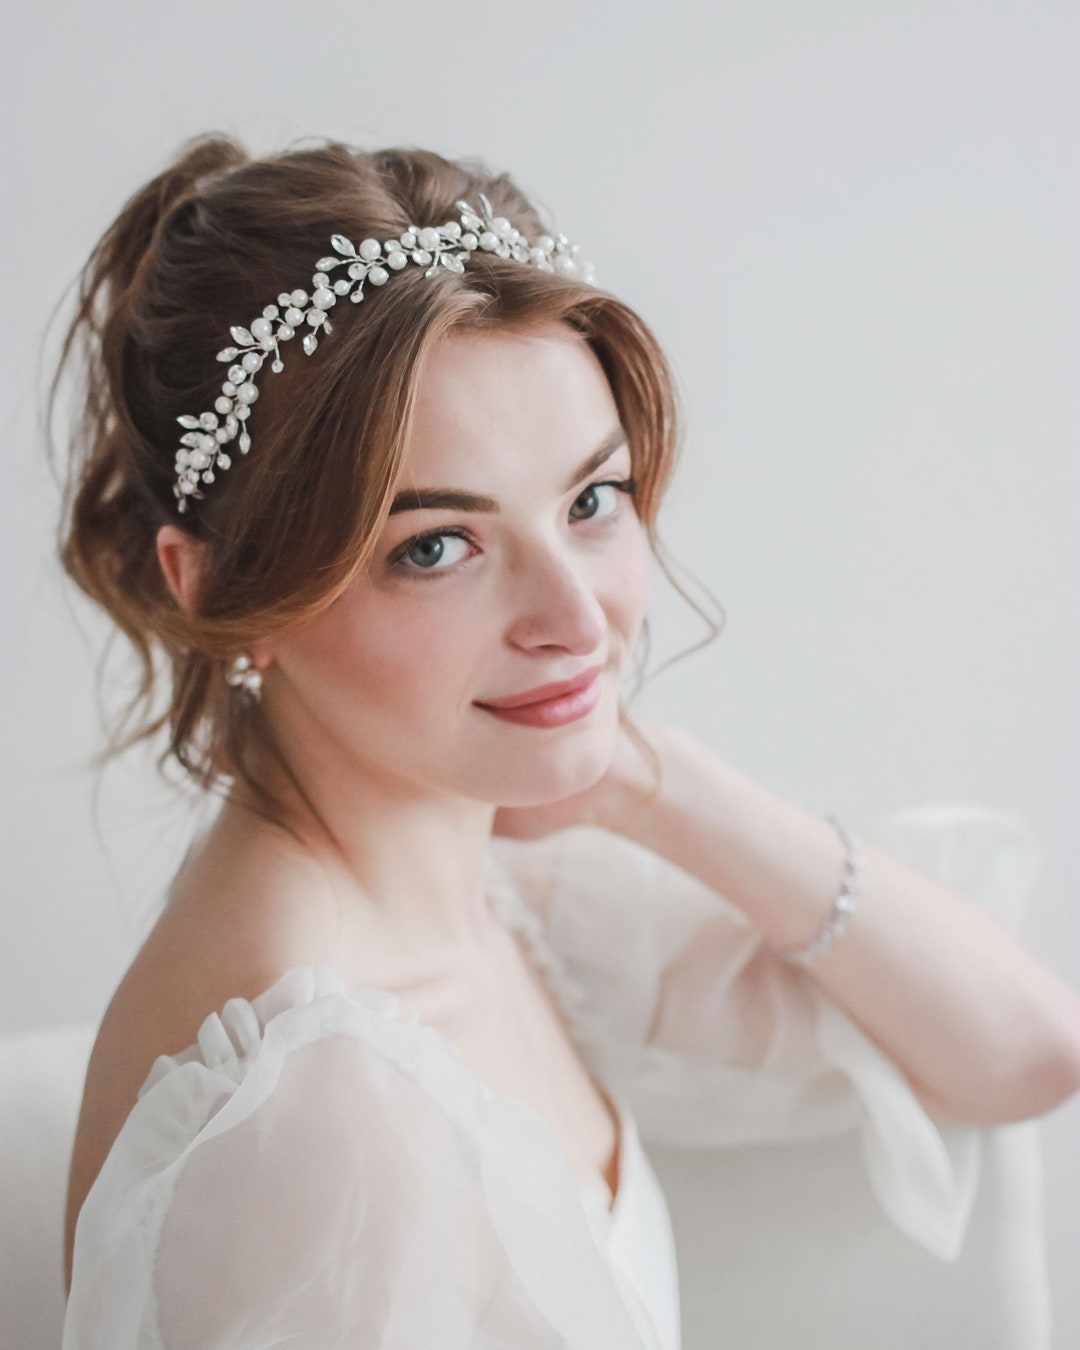 25+ Prettiest Ways To Add The Charm of Pearls To Your Bridal Hairstyle